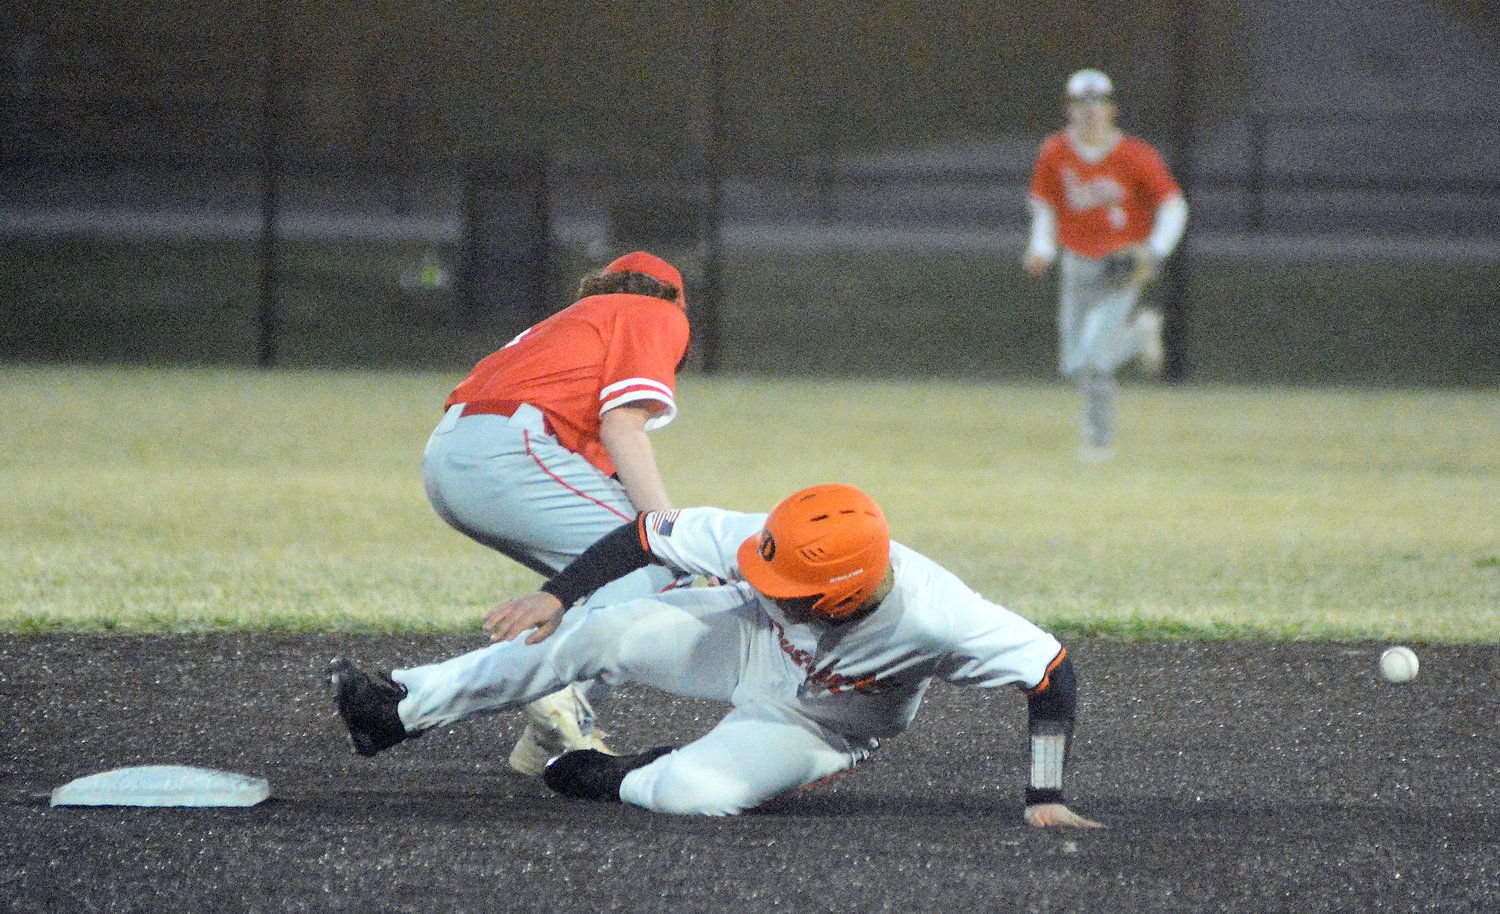 Eli Wilson (middle) slides safely into second base for Tyler Ahring’s Owensville Dutchmen during preseason Four Rivers Conference (FRC) Tournament action against St. James at OHS Field.